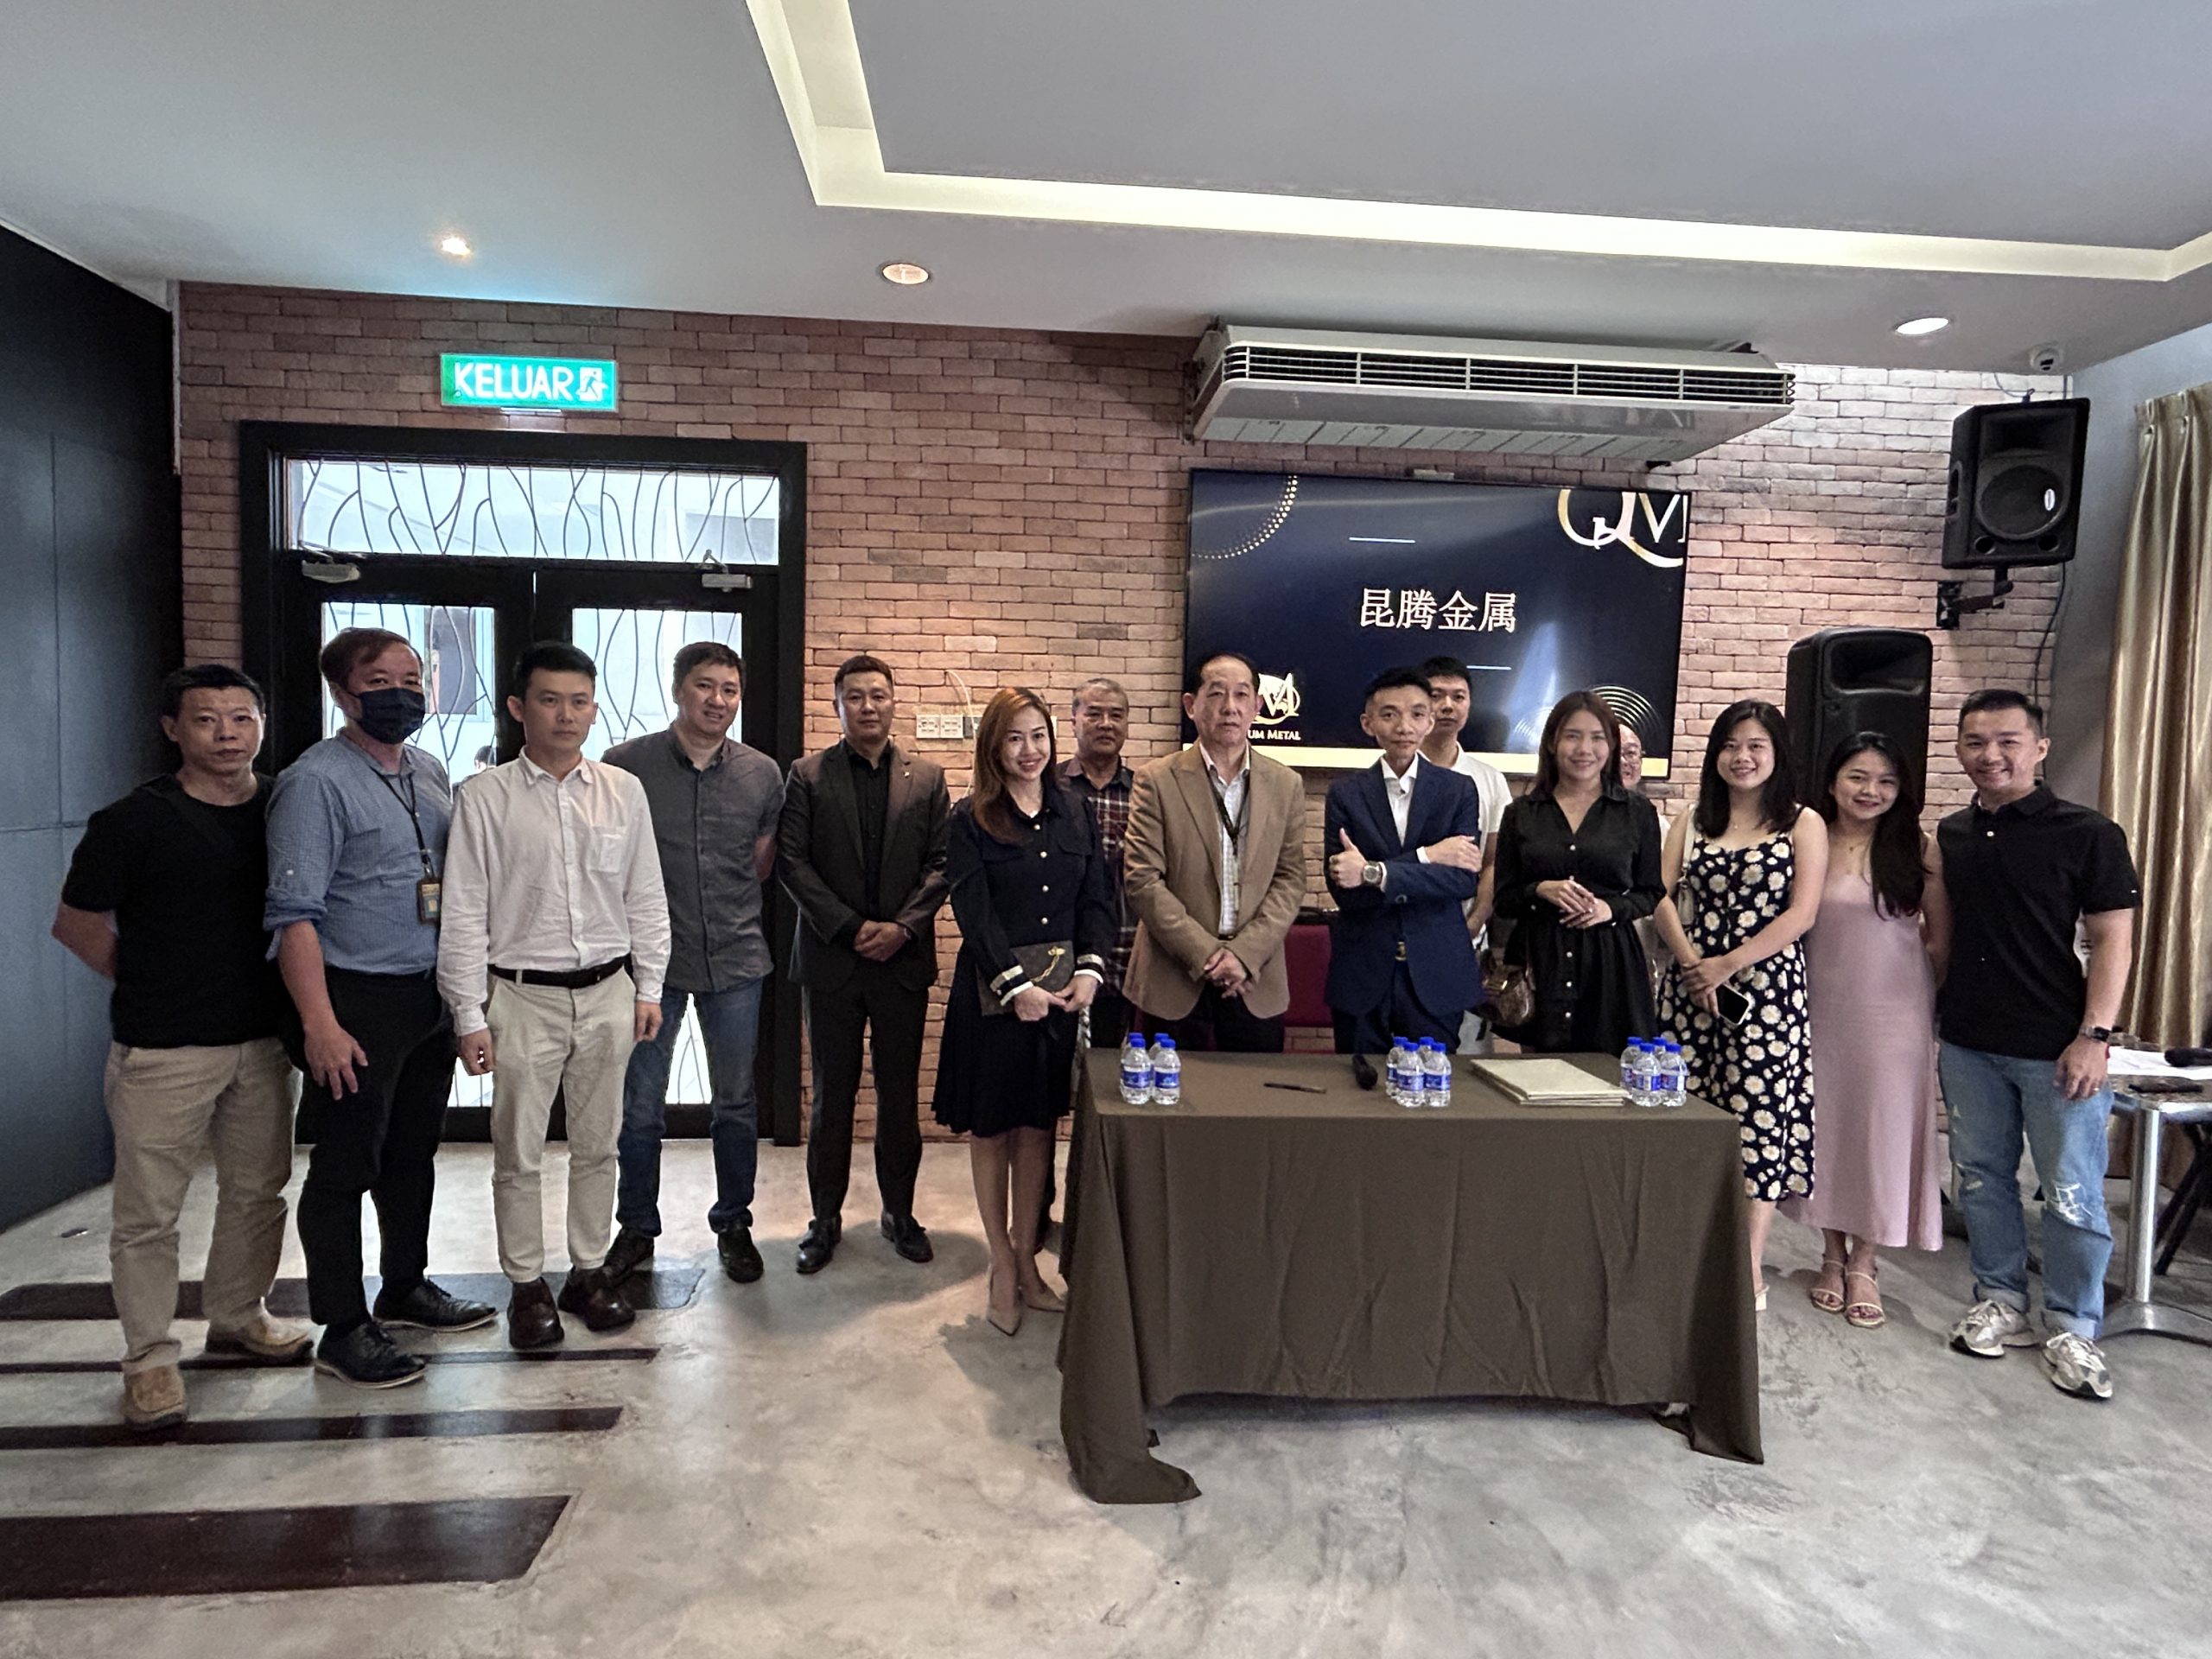 After the ceremony, Dato' Lim Lian Soon (eighth from left), Ze Guanxiong (fifth from right), Hong Baoqin (sixth from left), Ke Zhongchen (third from left), Chen Shunjie (second from left) and others happily took a group photo.